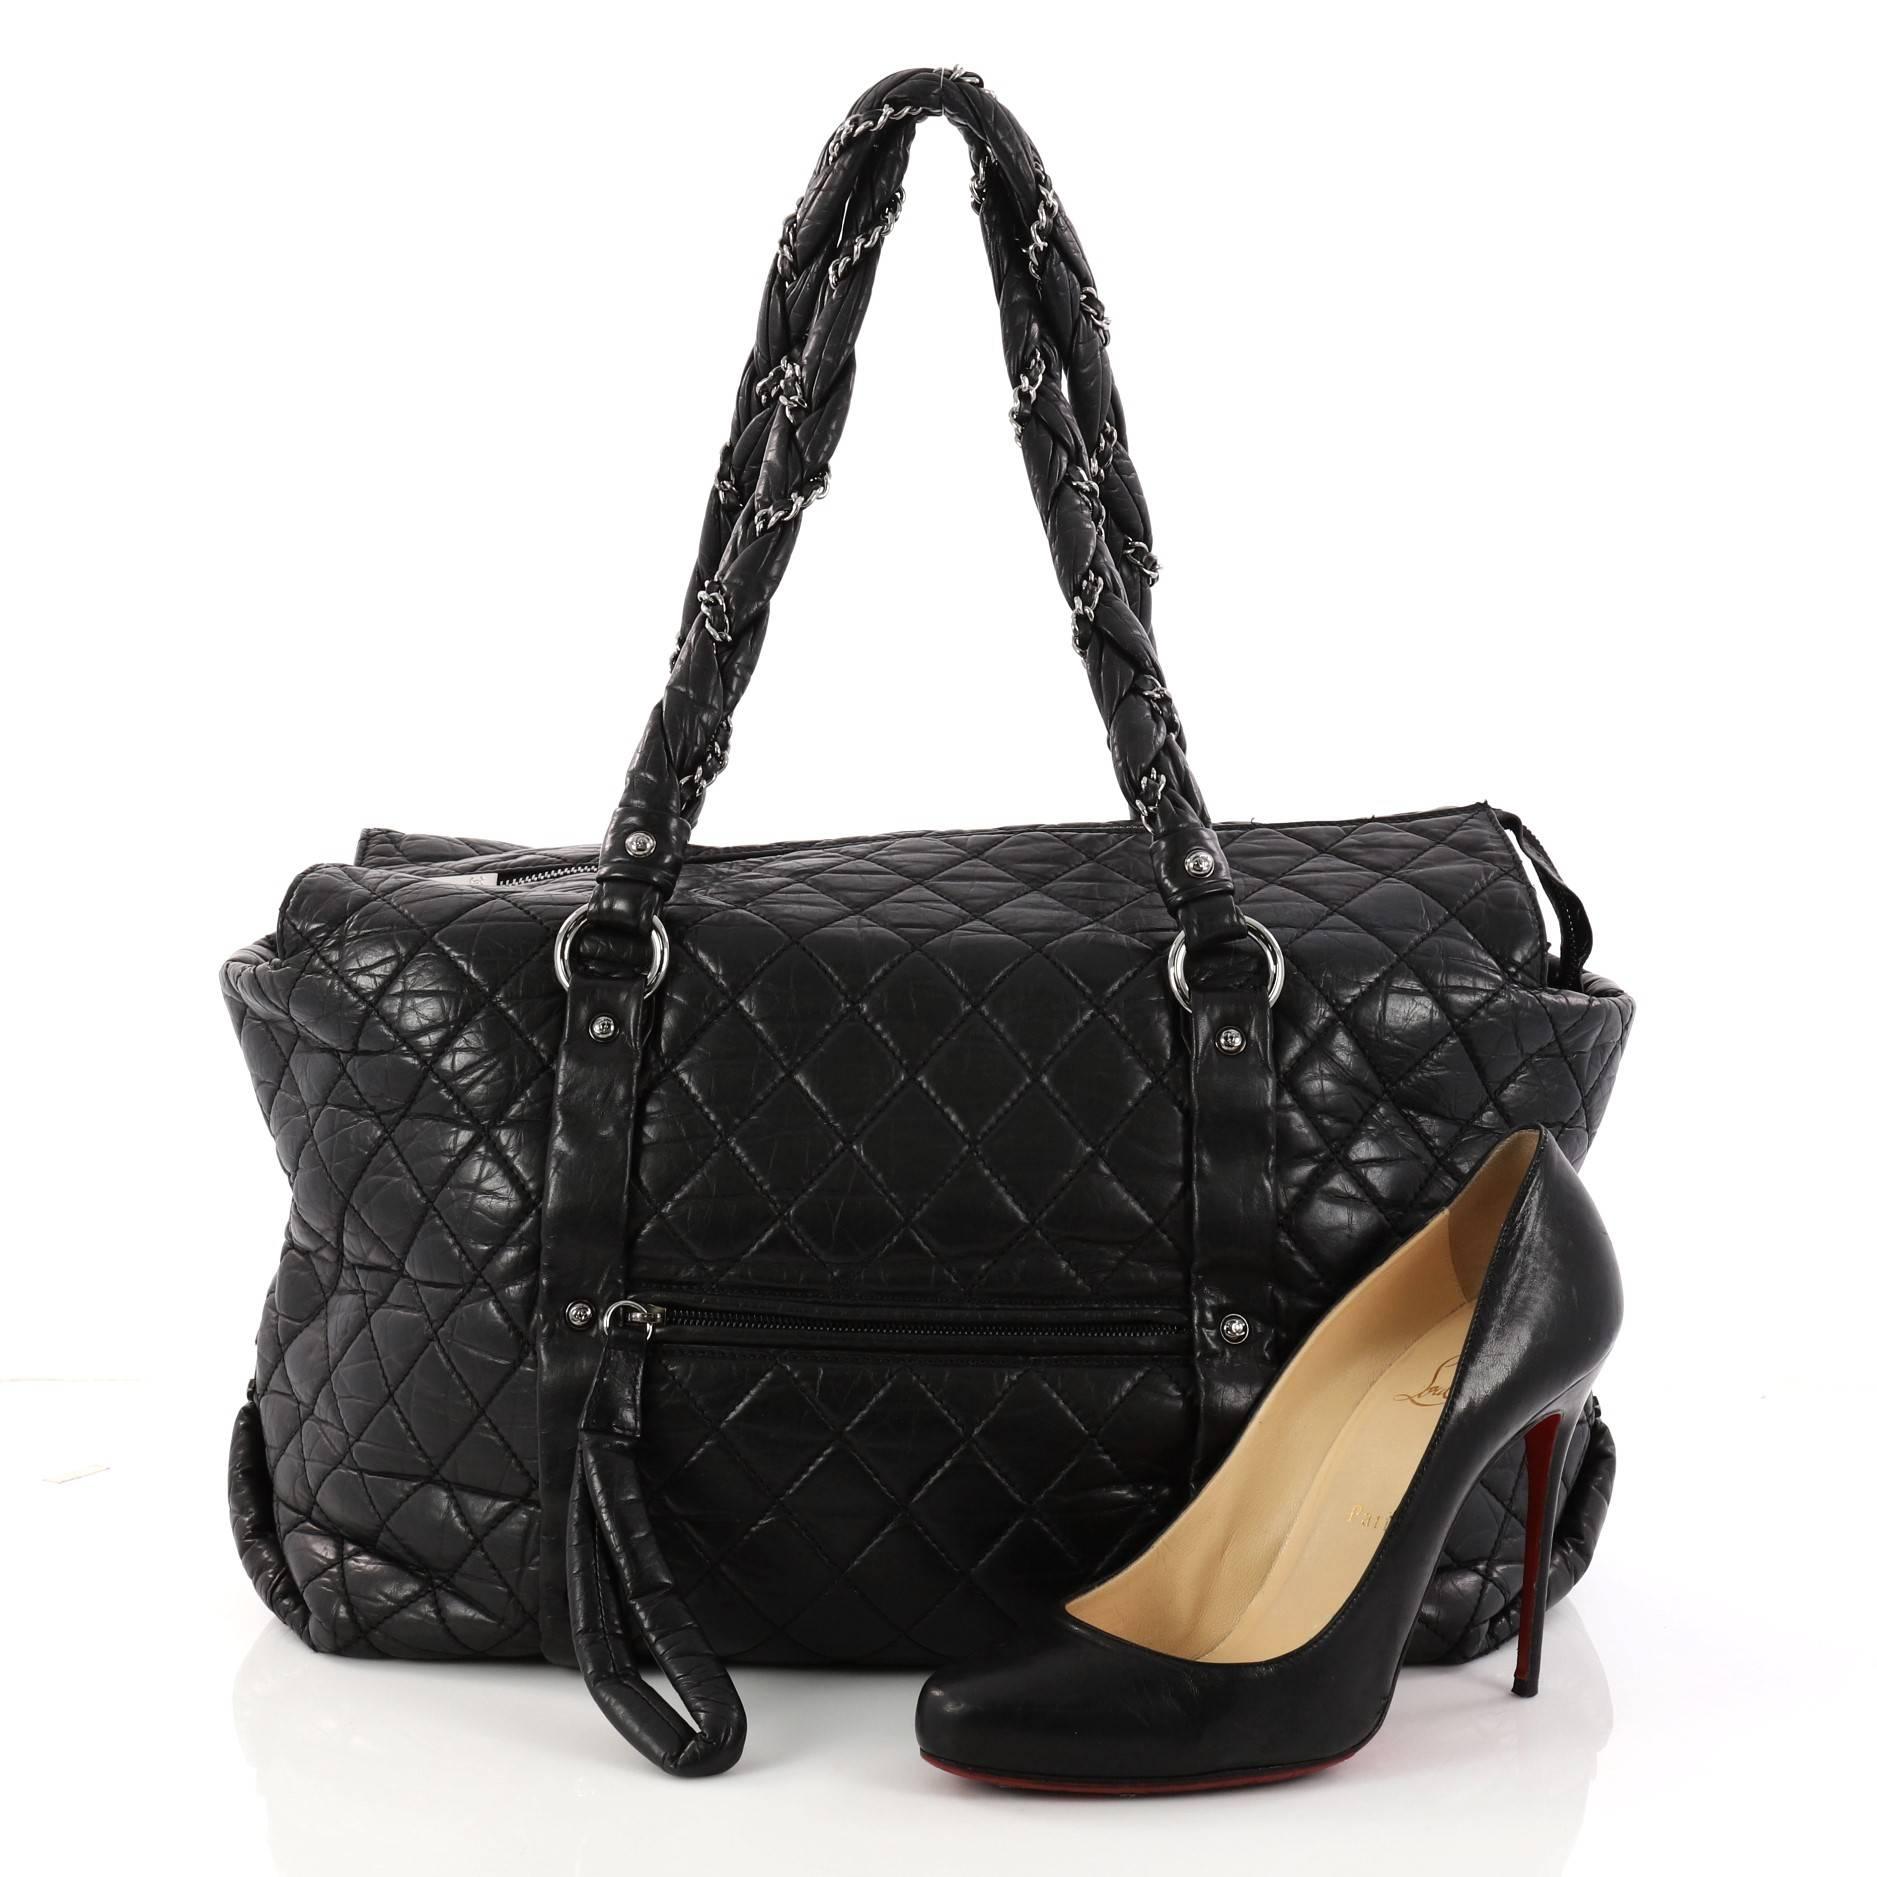 This authentic Chanel Ligne Lady Braid Tote Quilted Leather XL is perfect for the on-the-go fashionista for everyday use and light travel. Constructed from black diamond quilted distressed leather, this oversized tote features intertwined woven